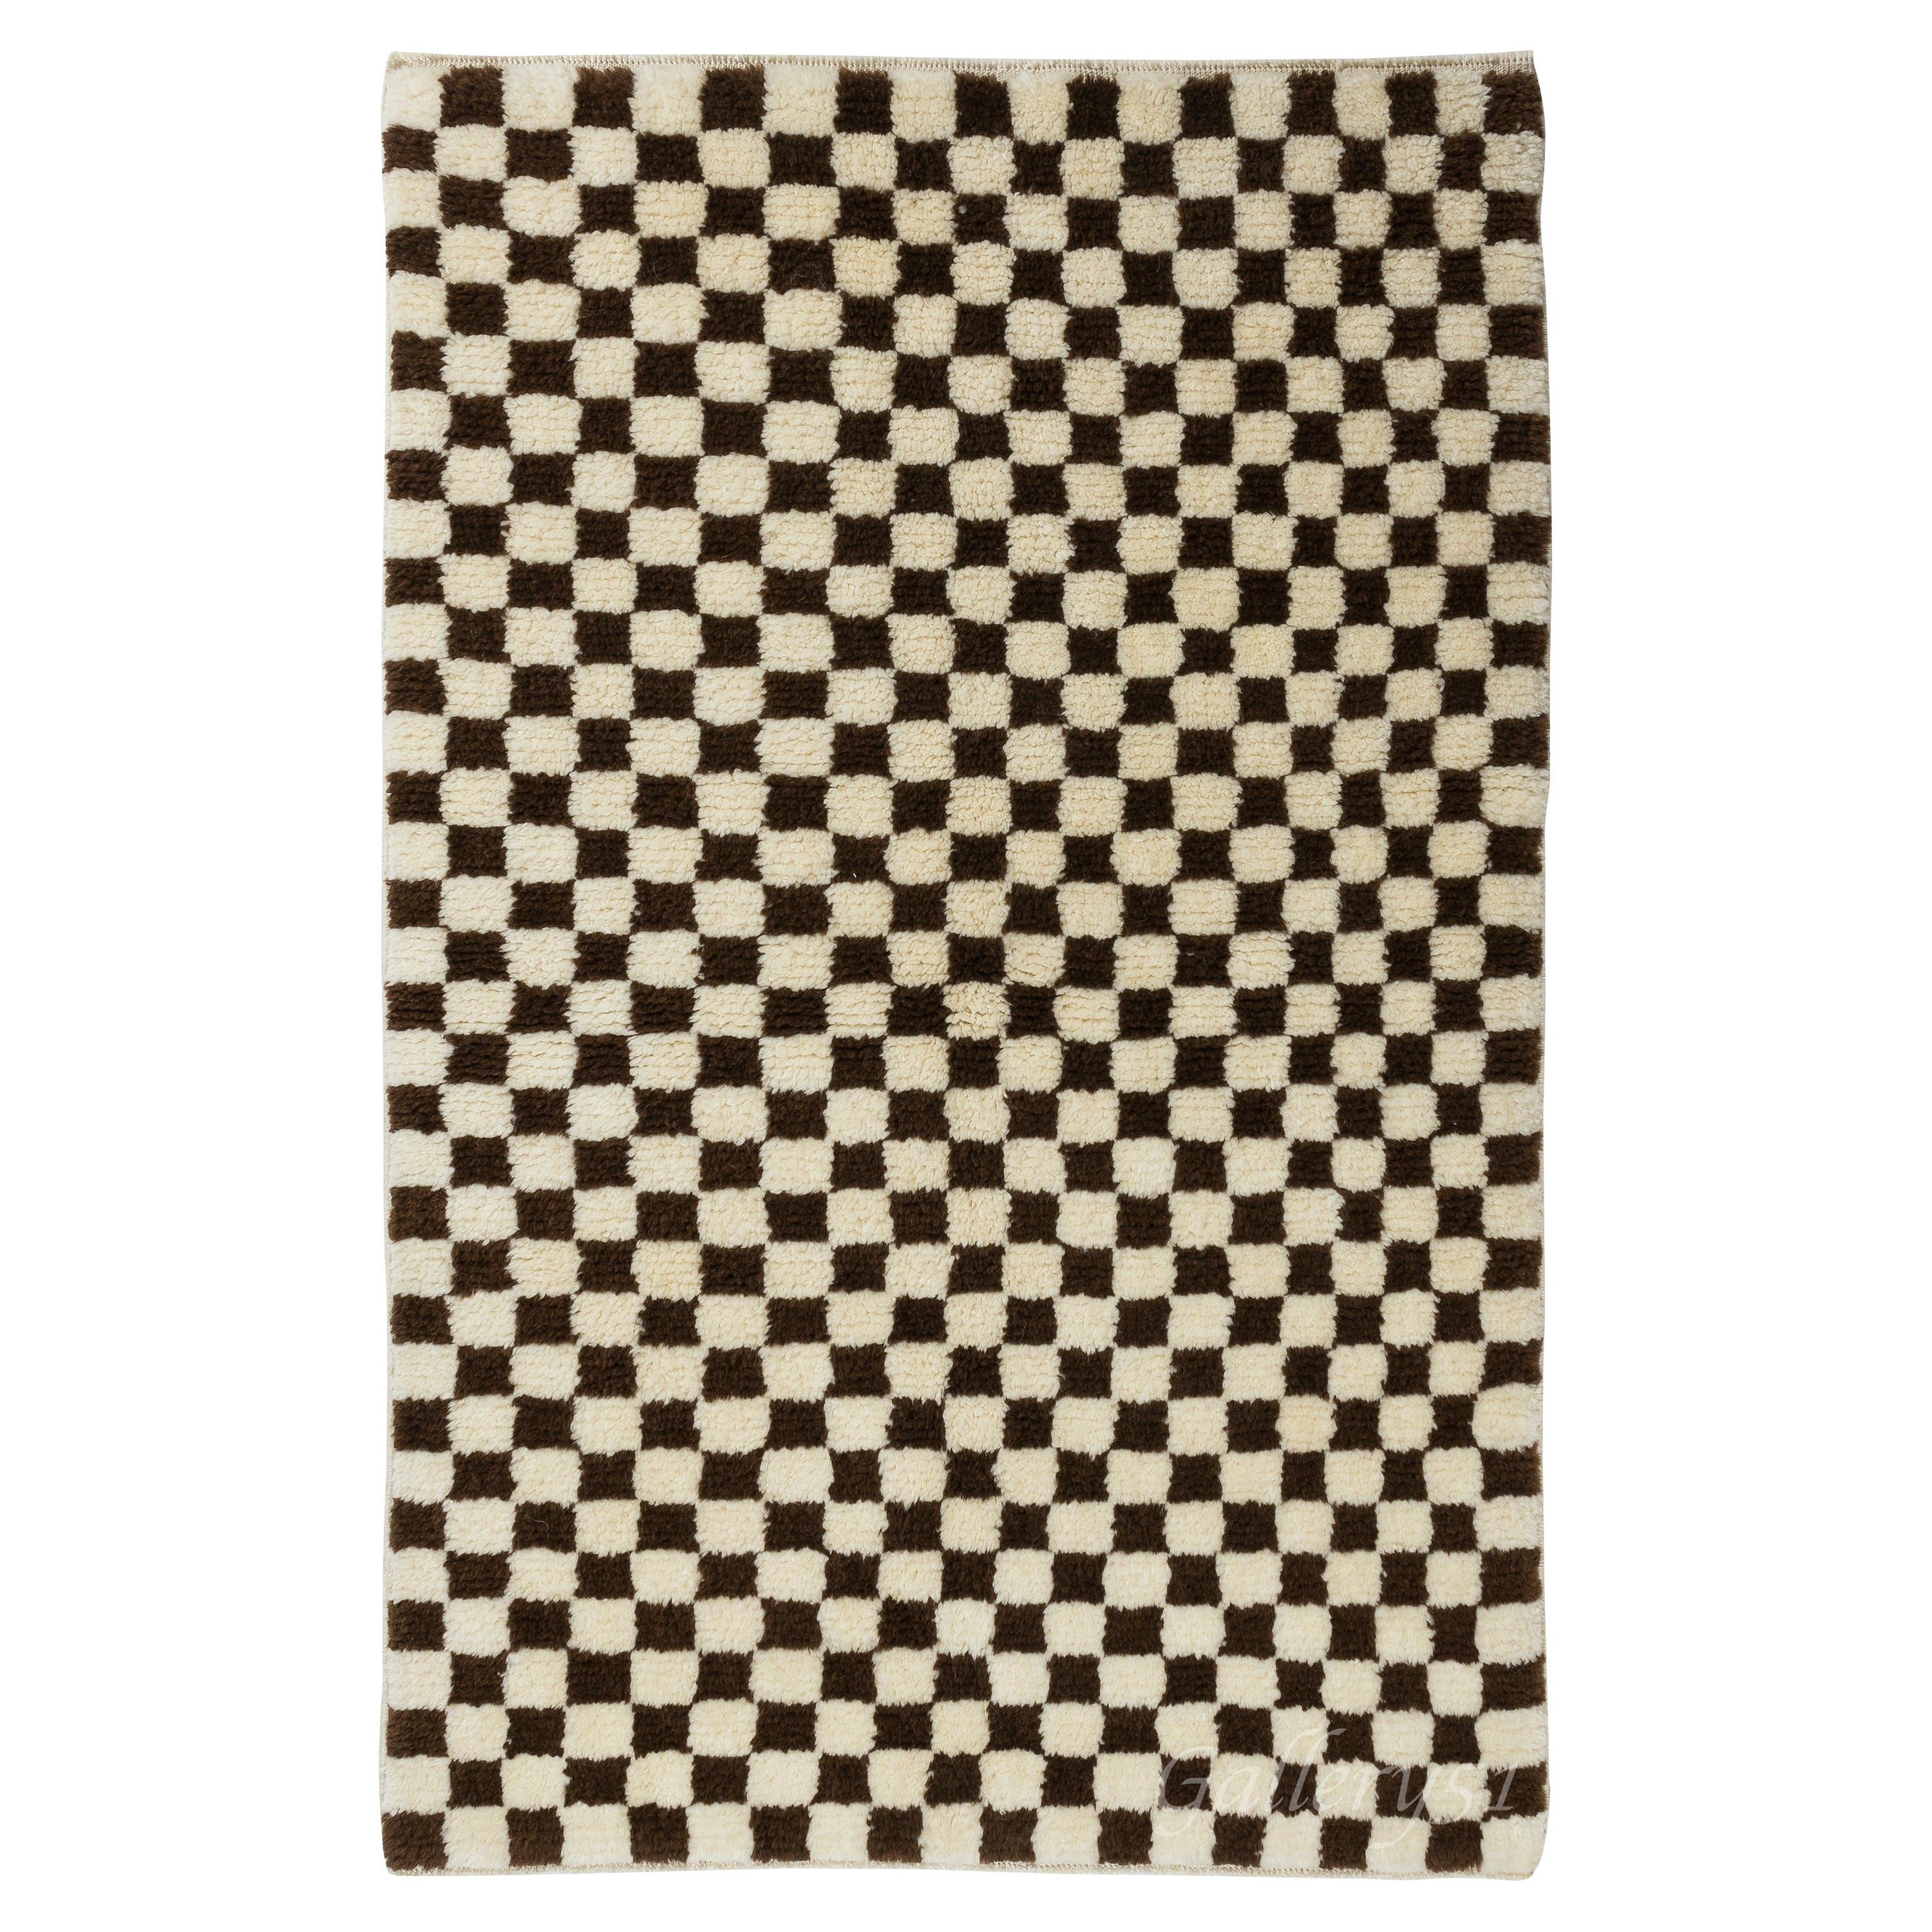 4x6 ft Custom Handmade Tulu Rug, All Wool, New Checkered Design in Brown & Ivory For Sale